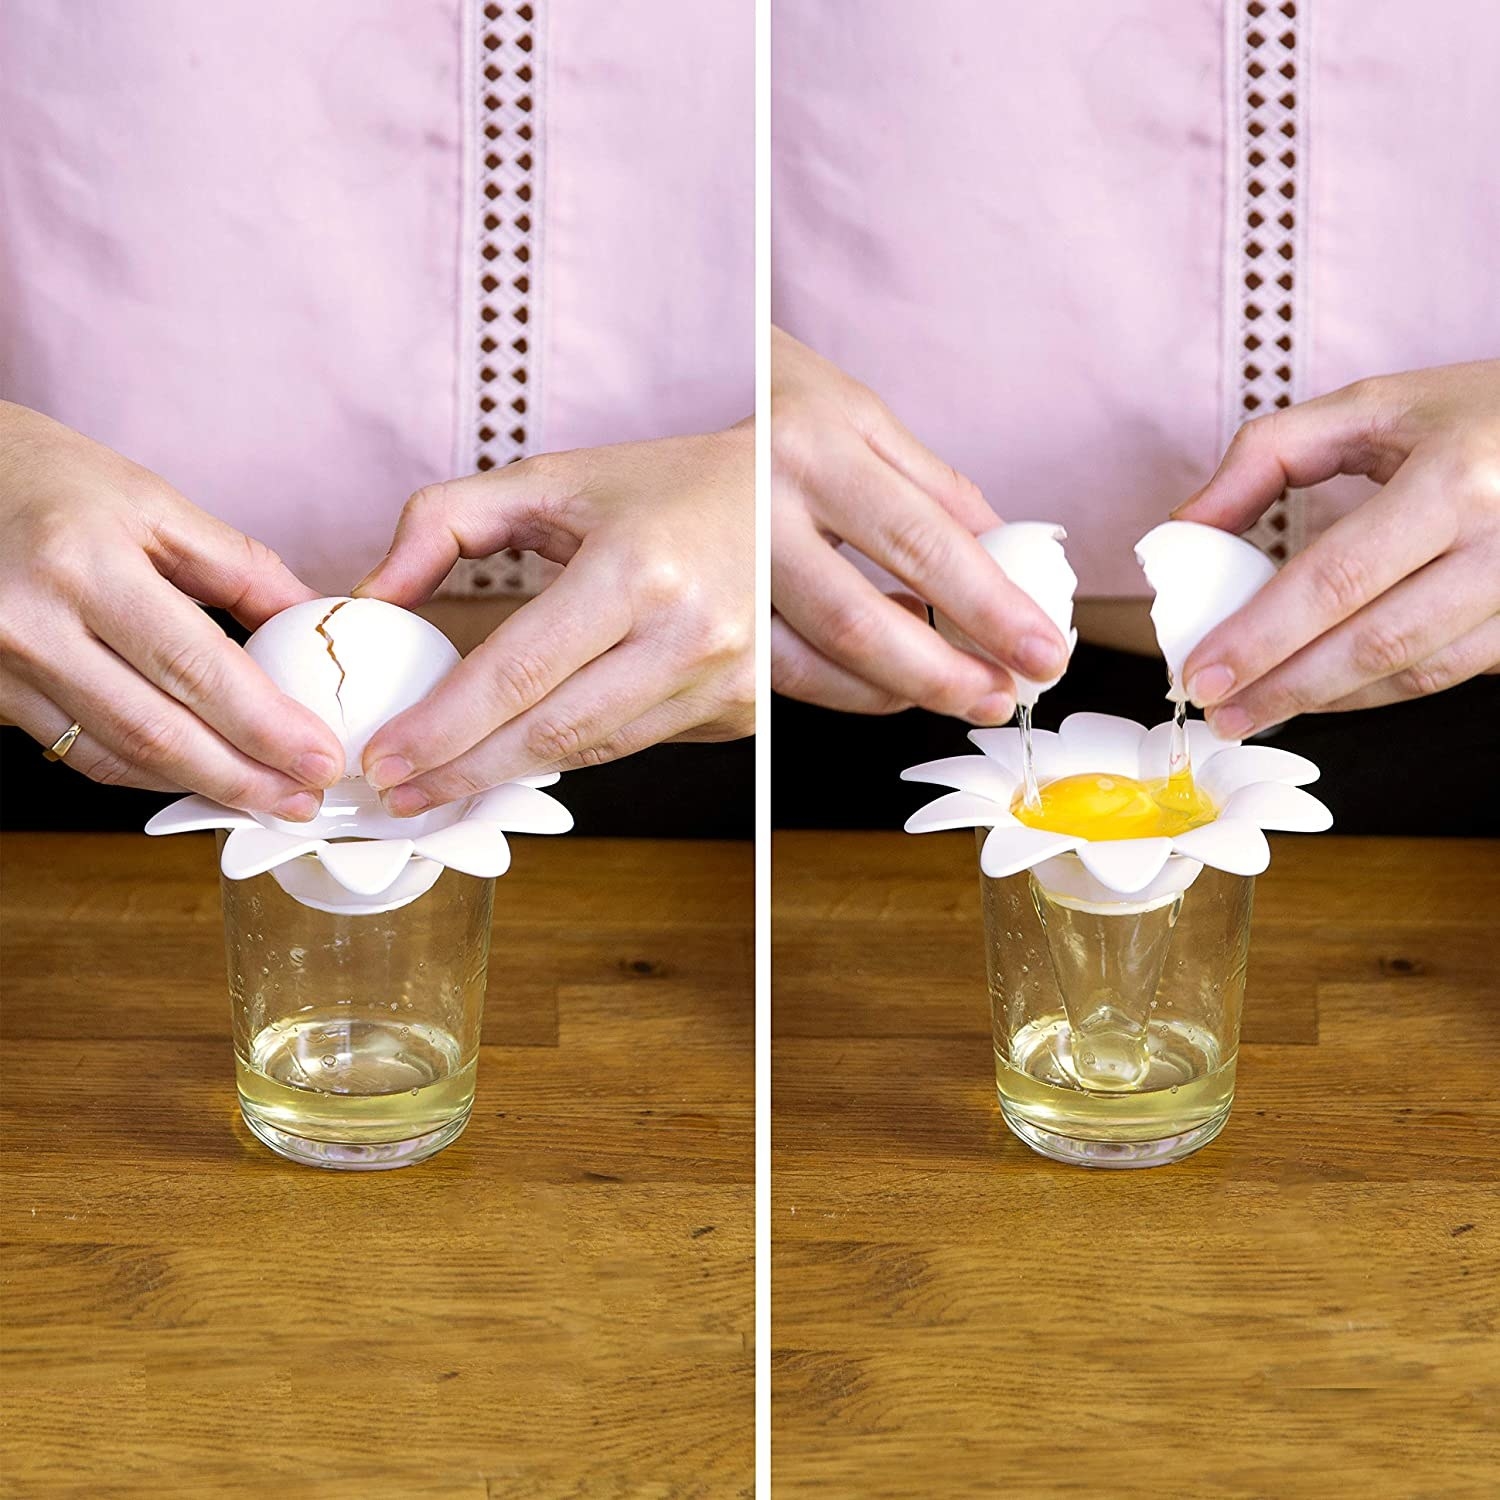 A person cracking an egg into the flower